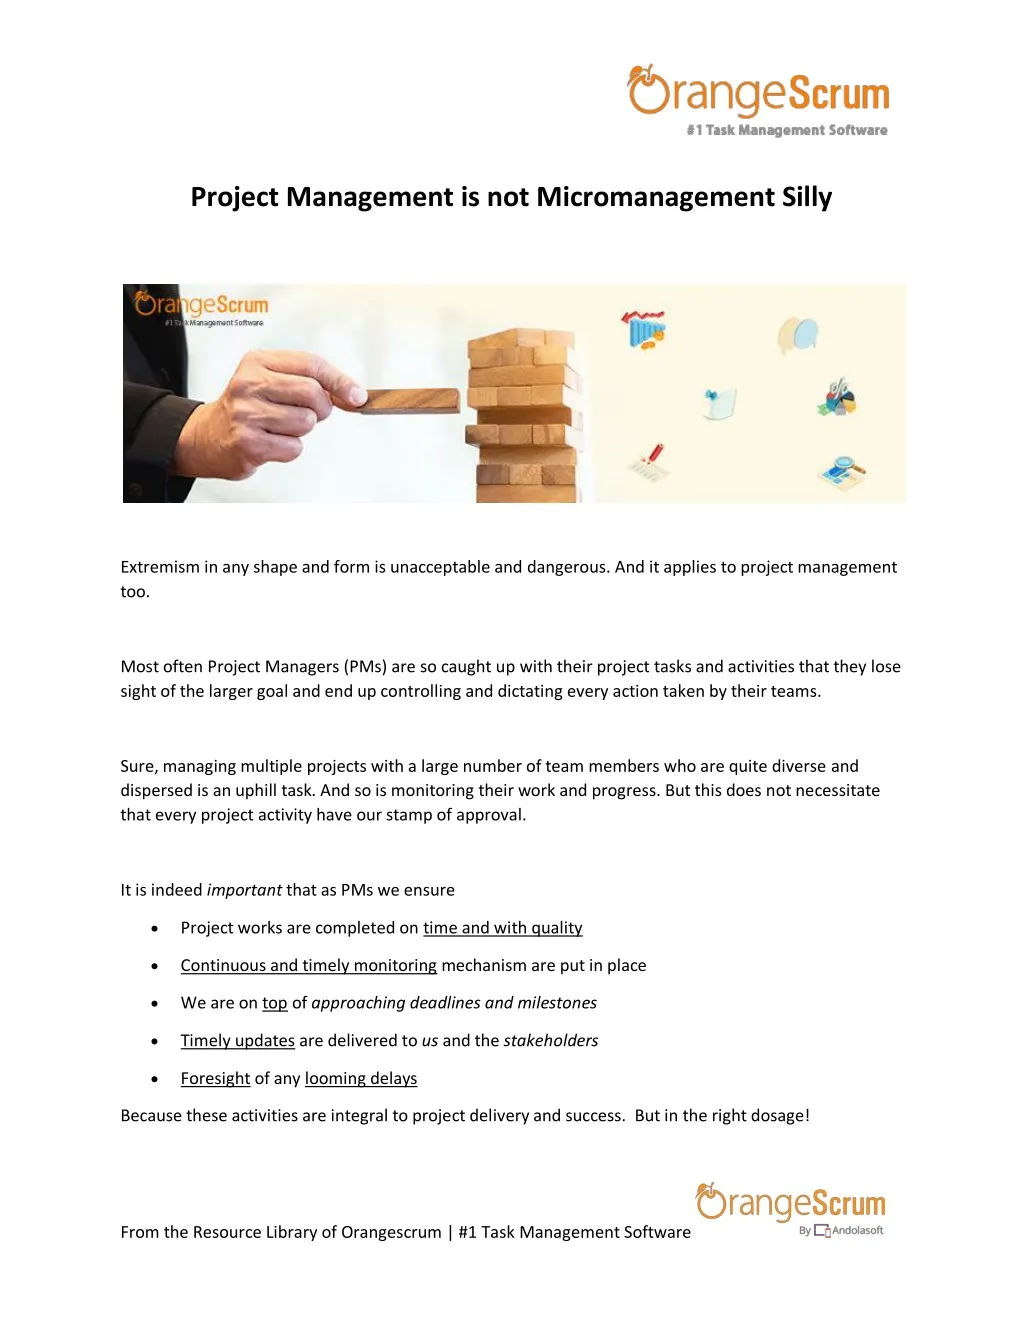 project management is not micromanagement silly